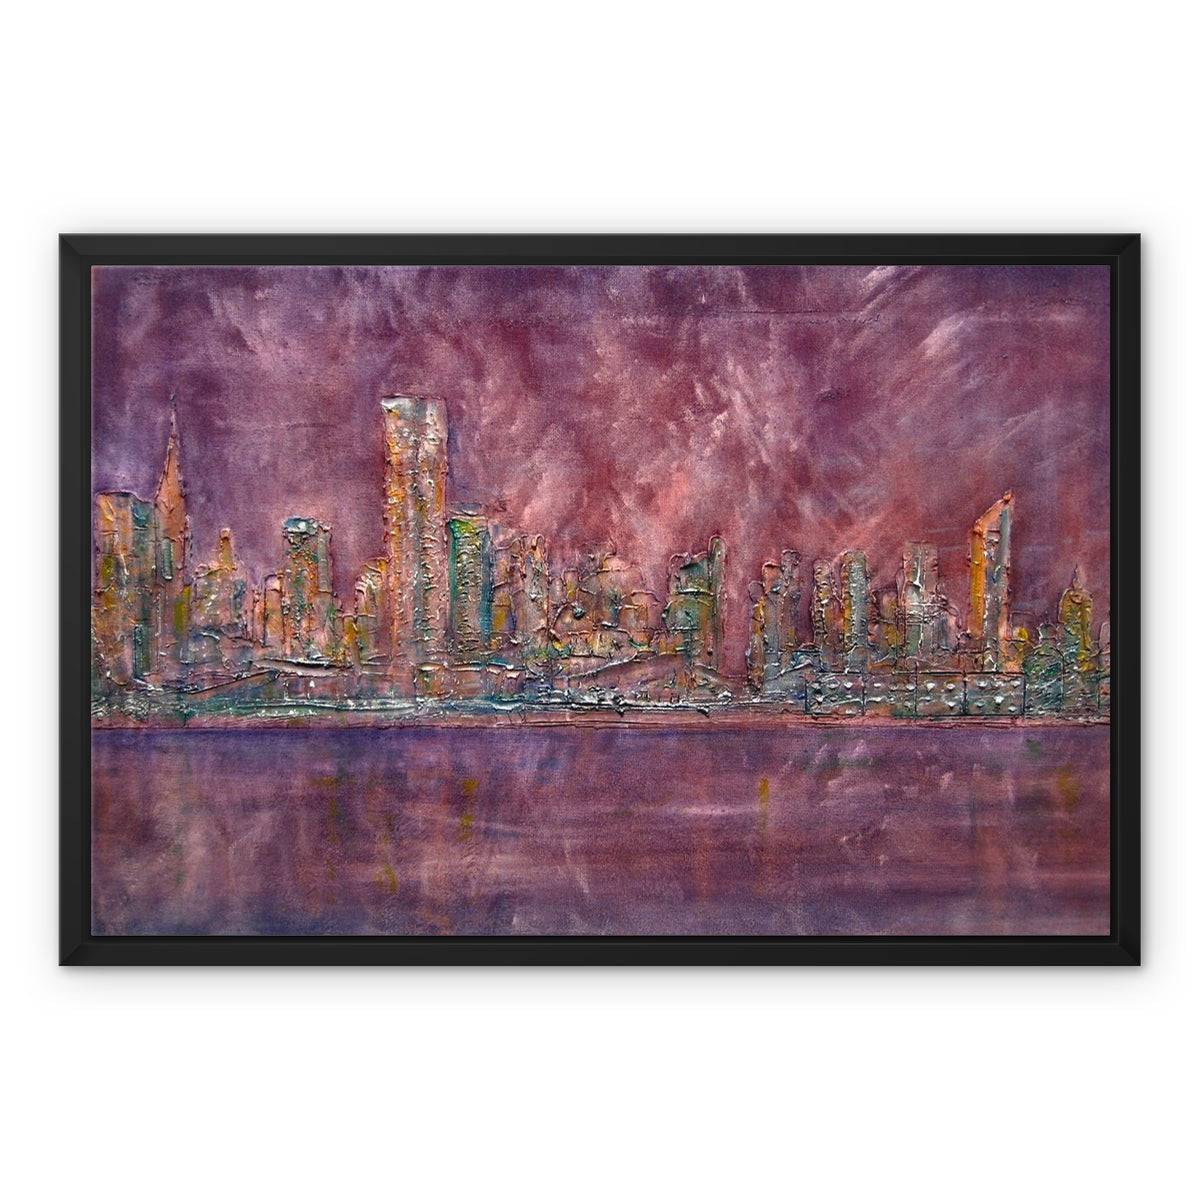 East Side Snow New York Painting | Framed Canvas From Scotland-Floating Framed Canvas Prints-World Art Gallery-24"x18"-Paintings, Prints, Homeware, Art Gifts From Scotland By Scottish Artist Kevin Hunter